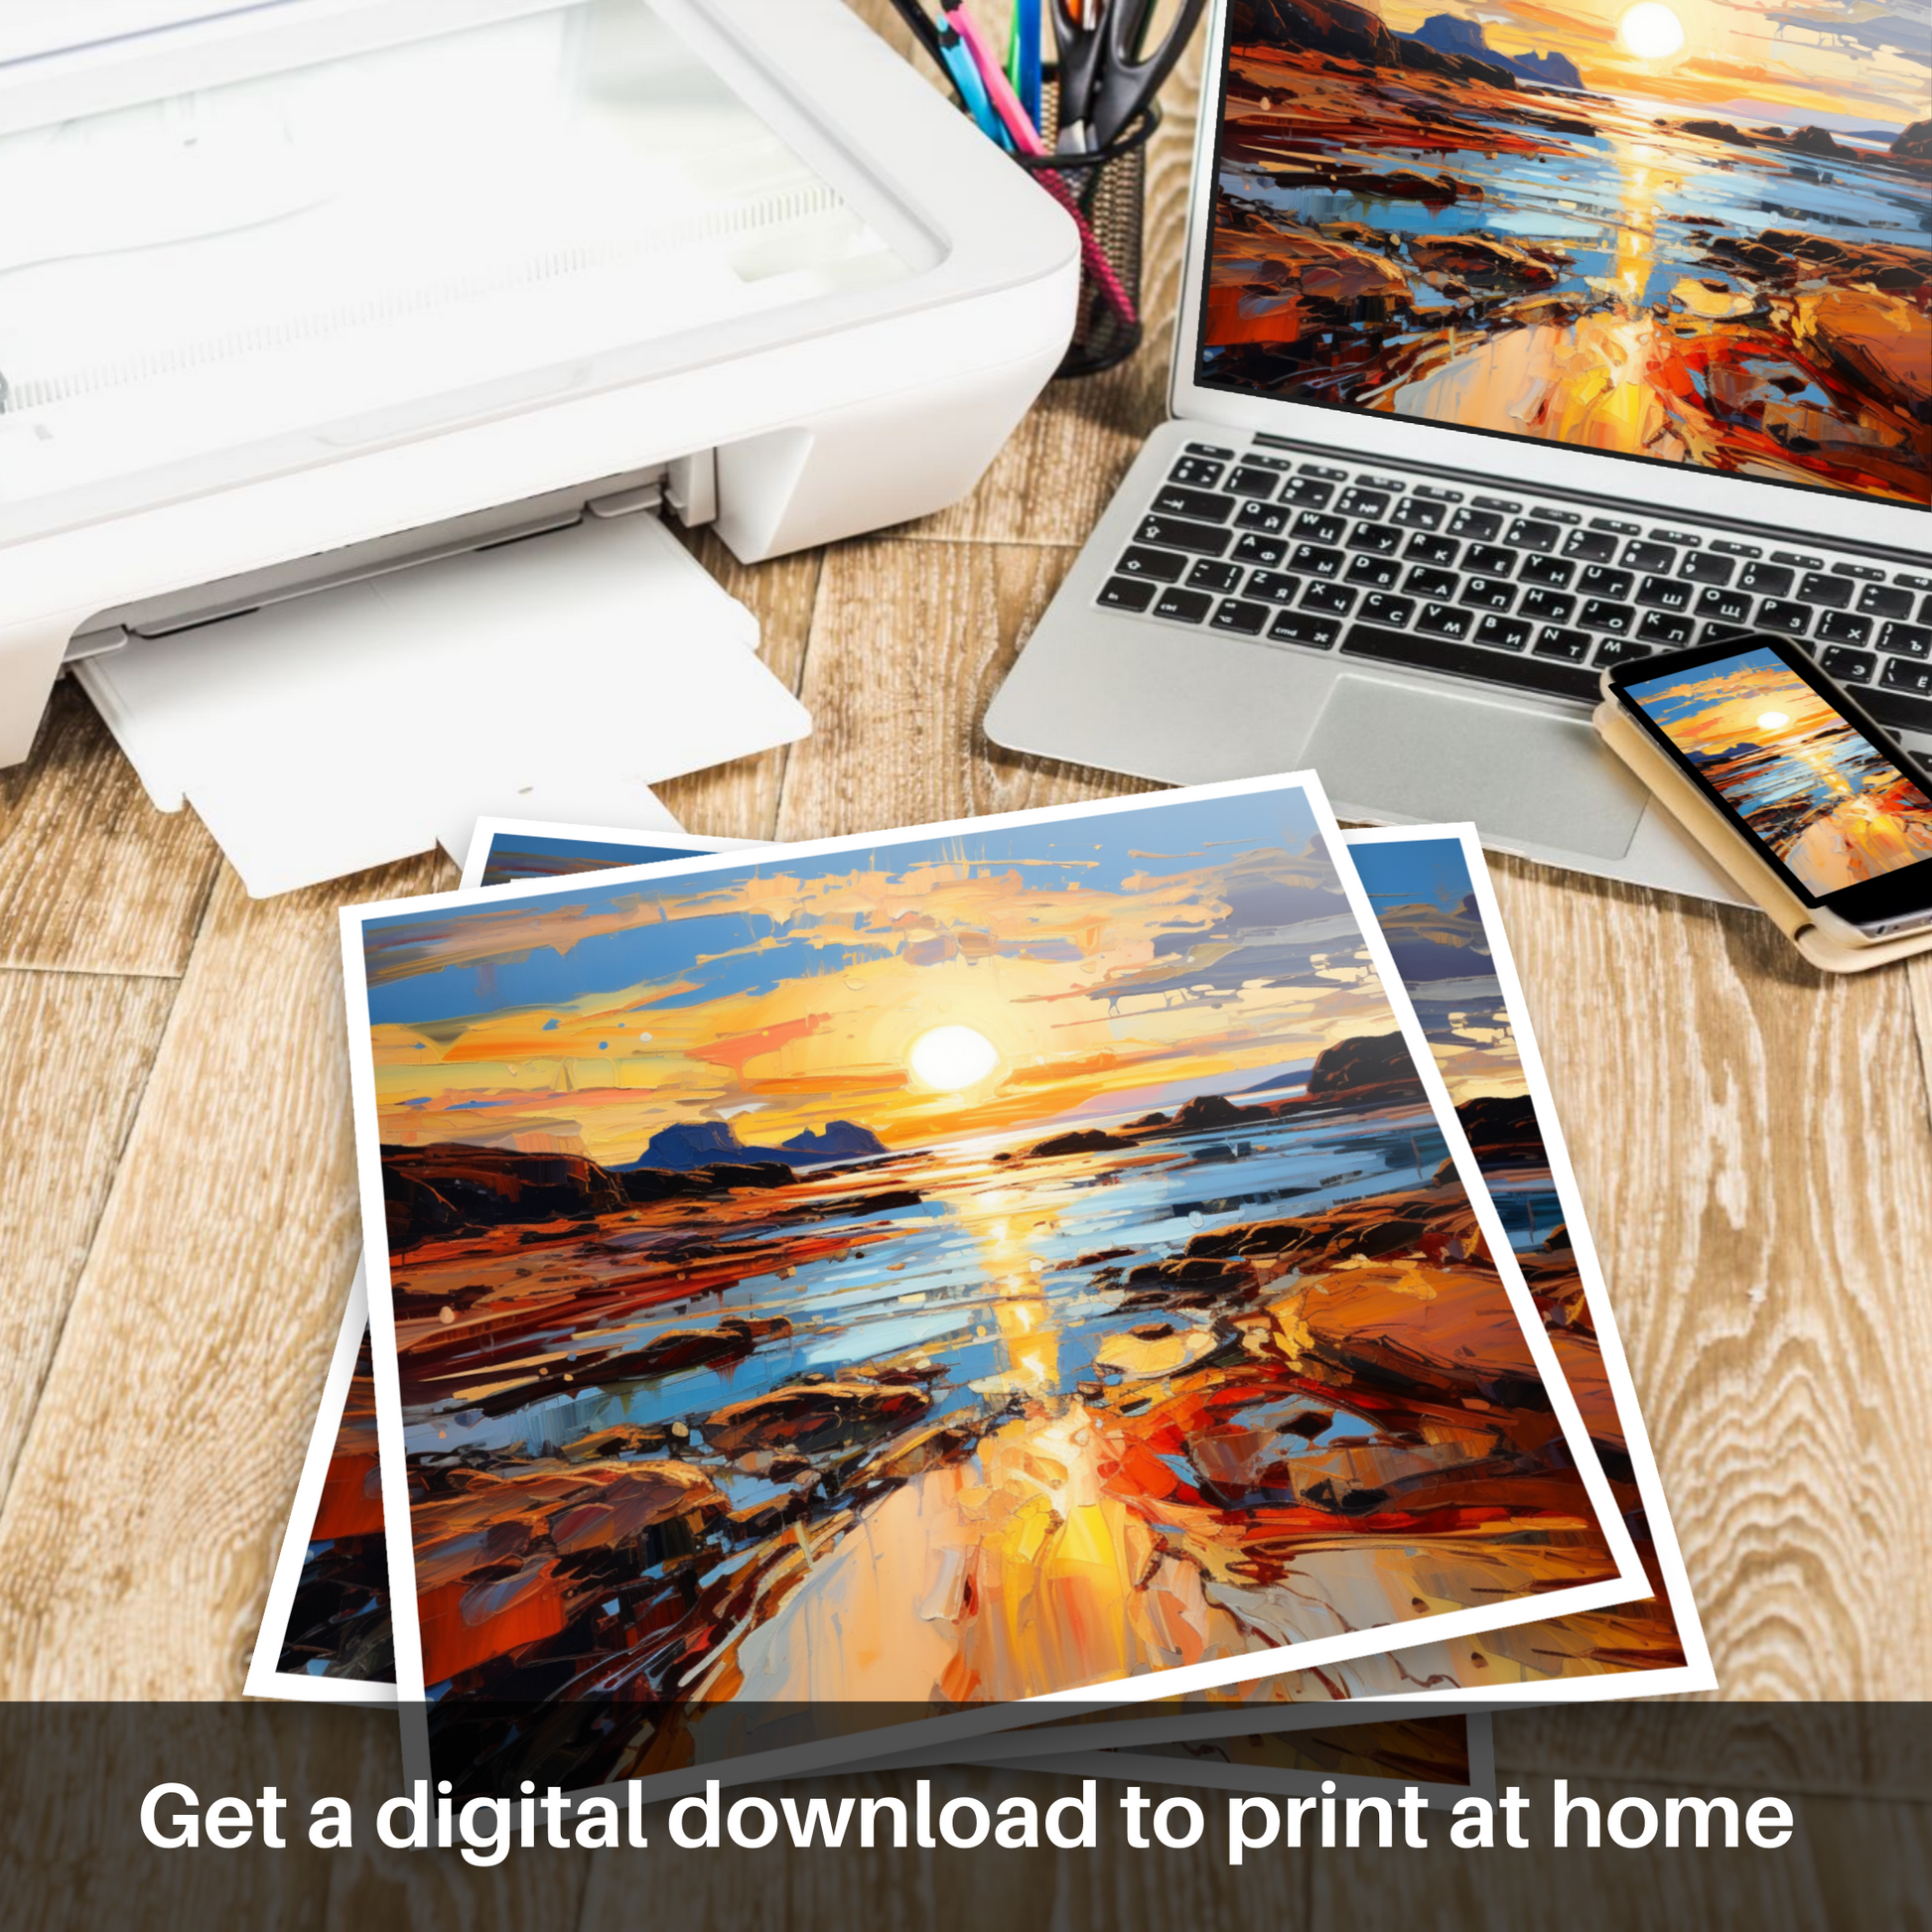 Downloadable and printable picture of Sound of Iona at golden hour